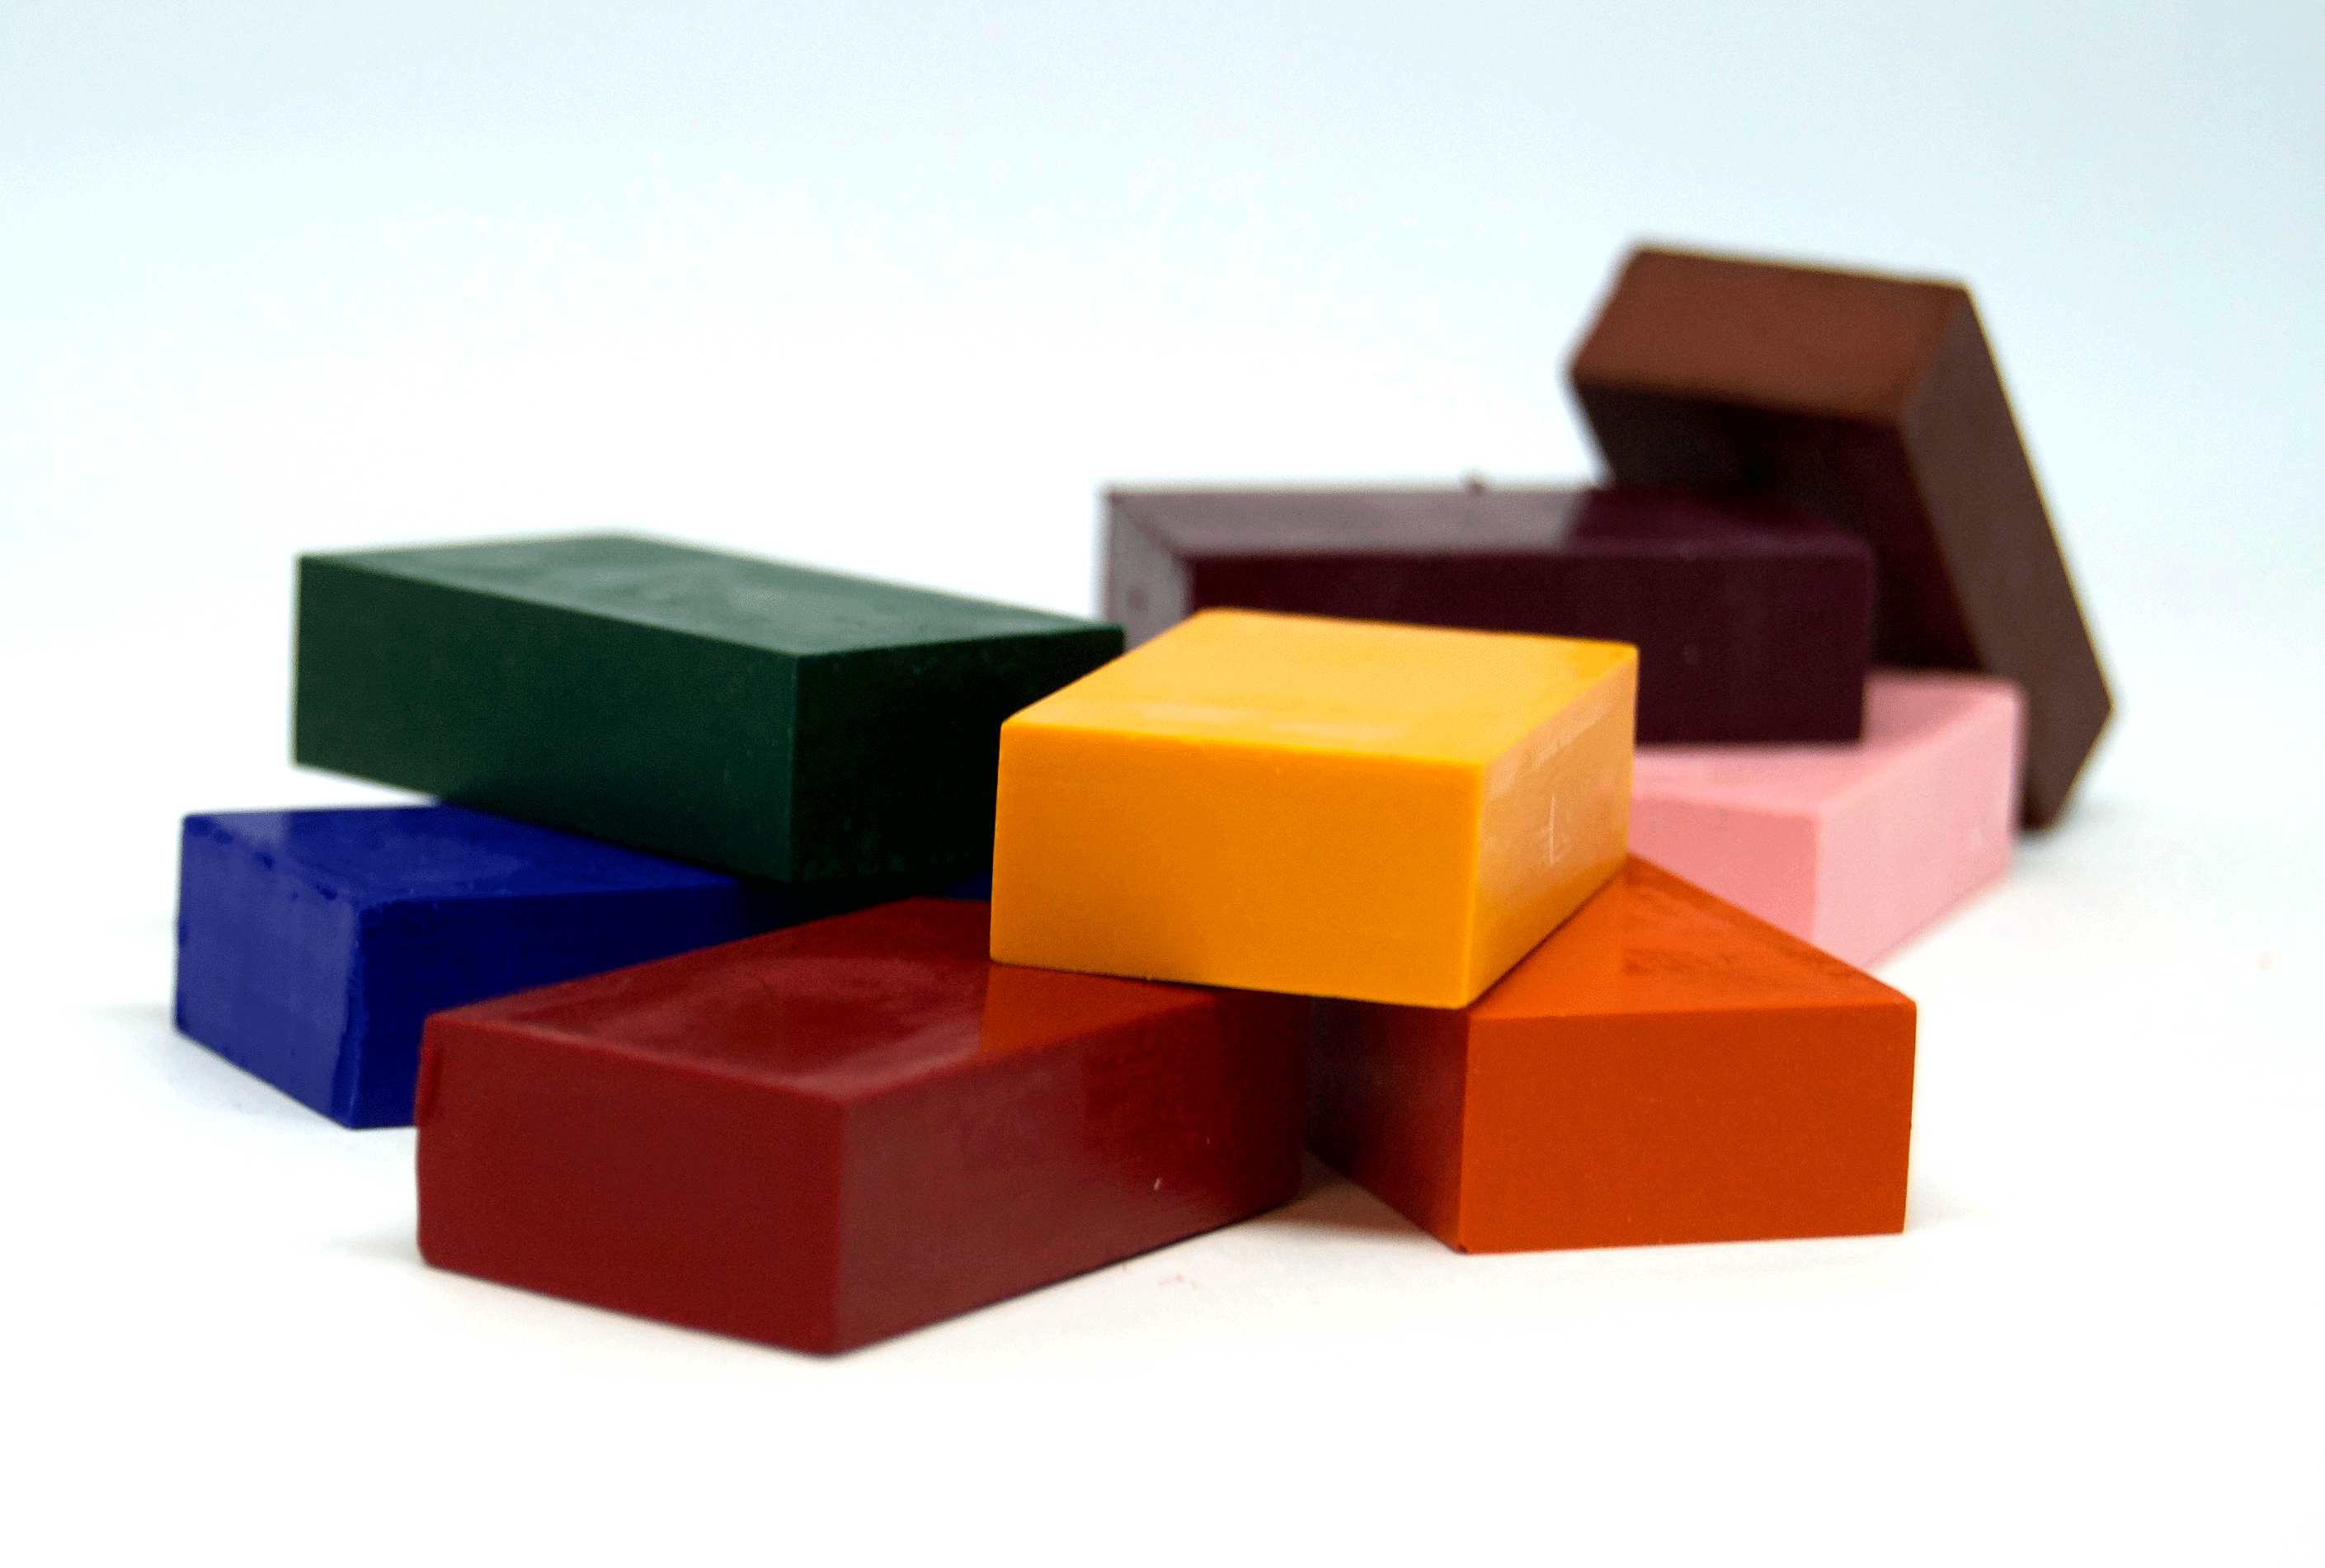 Stockmar Beeswax Block Crayons - 8 Standard Colours in a Tin